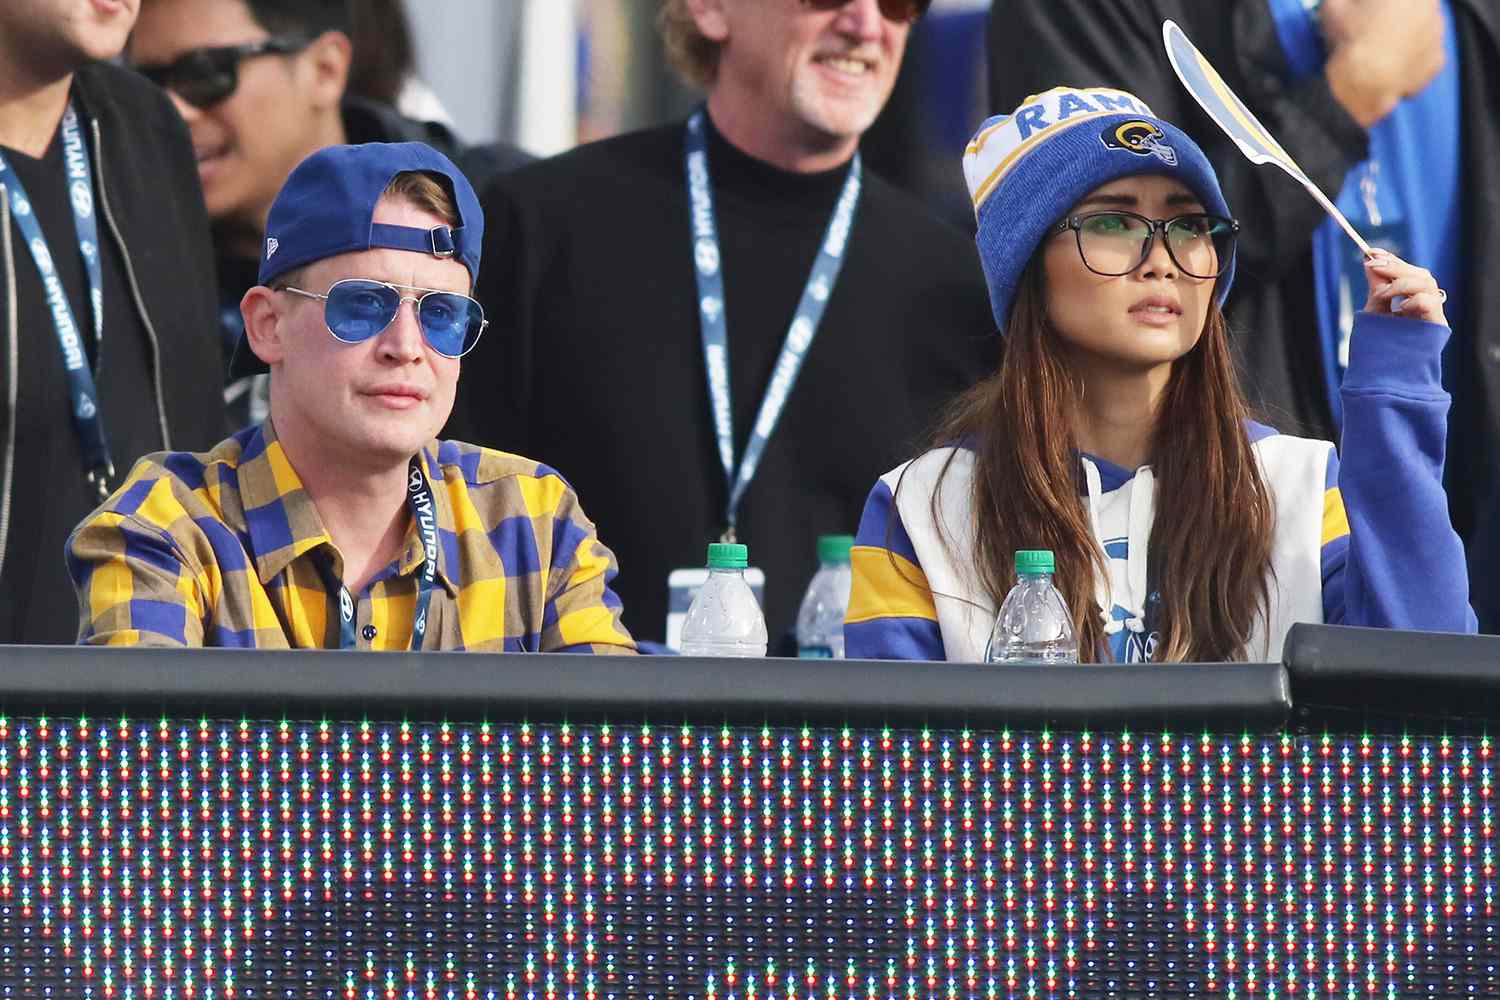 Macaulay Culkin wearing red nail polish and girlfriend Brenda Song attend the game between the Los Angeles Rams and the Arizona Cardinals at the Los Angeles Memorial Coliseum on December 29, 2019 in Los Angeles, California